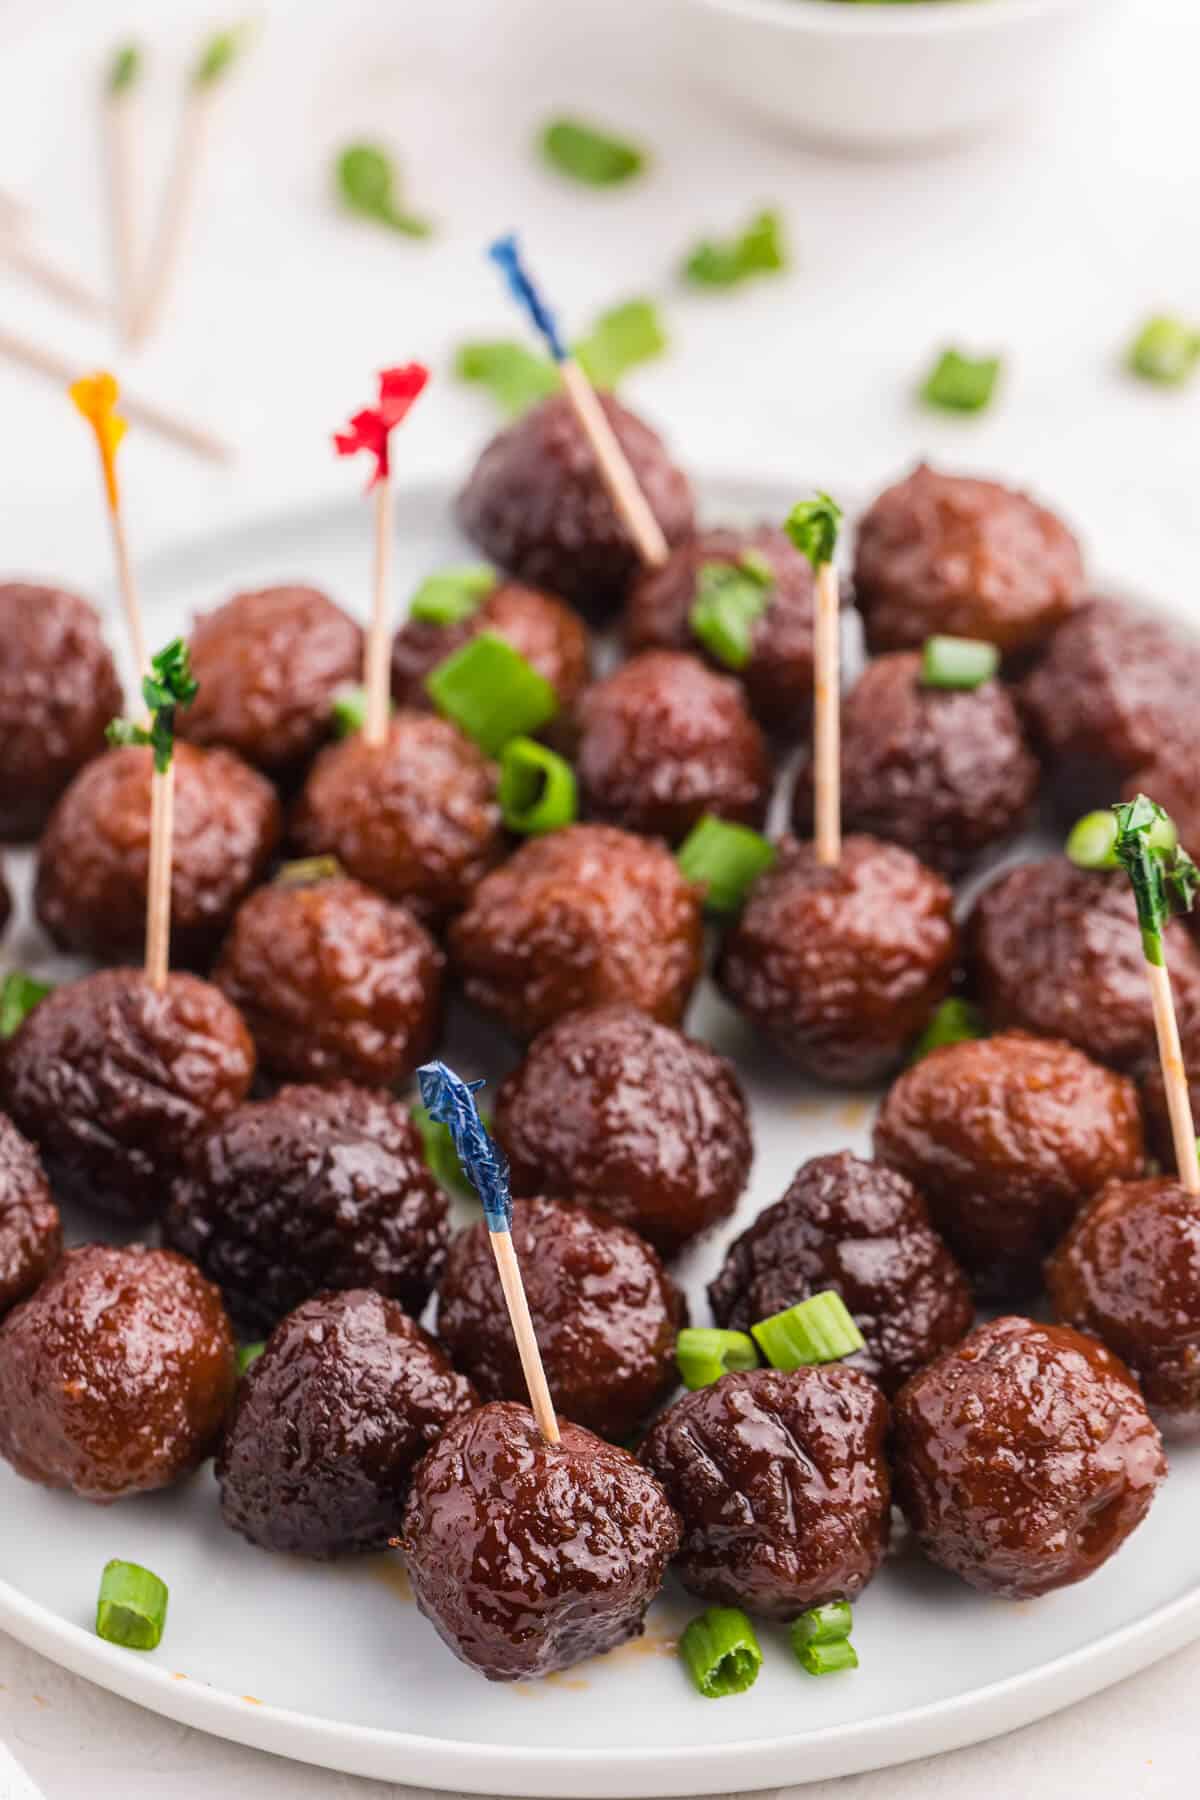 Grape jelly meatballs on a plate with toothpicks in some meatballs.